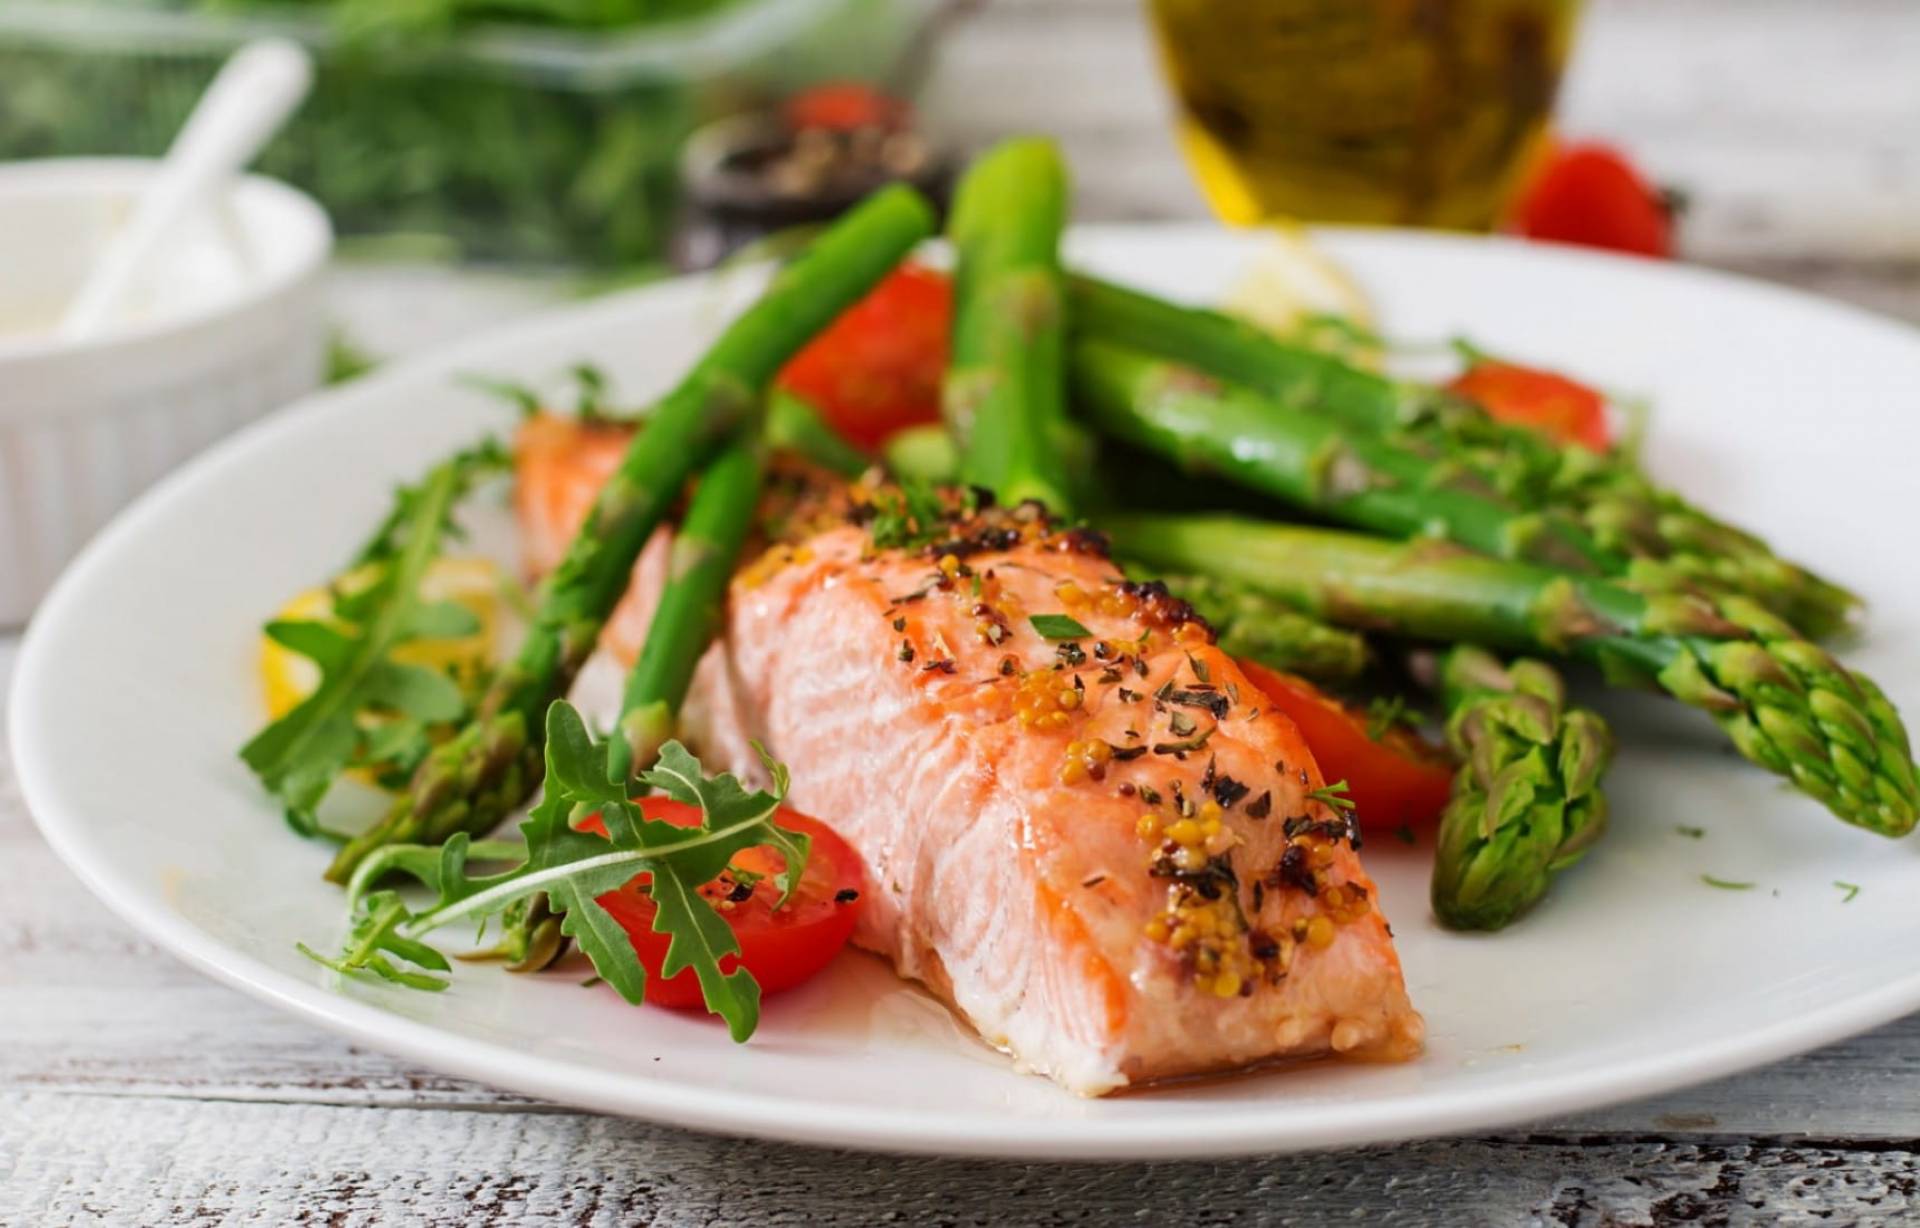 Sweet Chili Salmon with Mashed Sweet Potatoes and Asparagus - Paleo